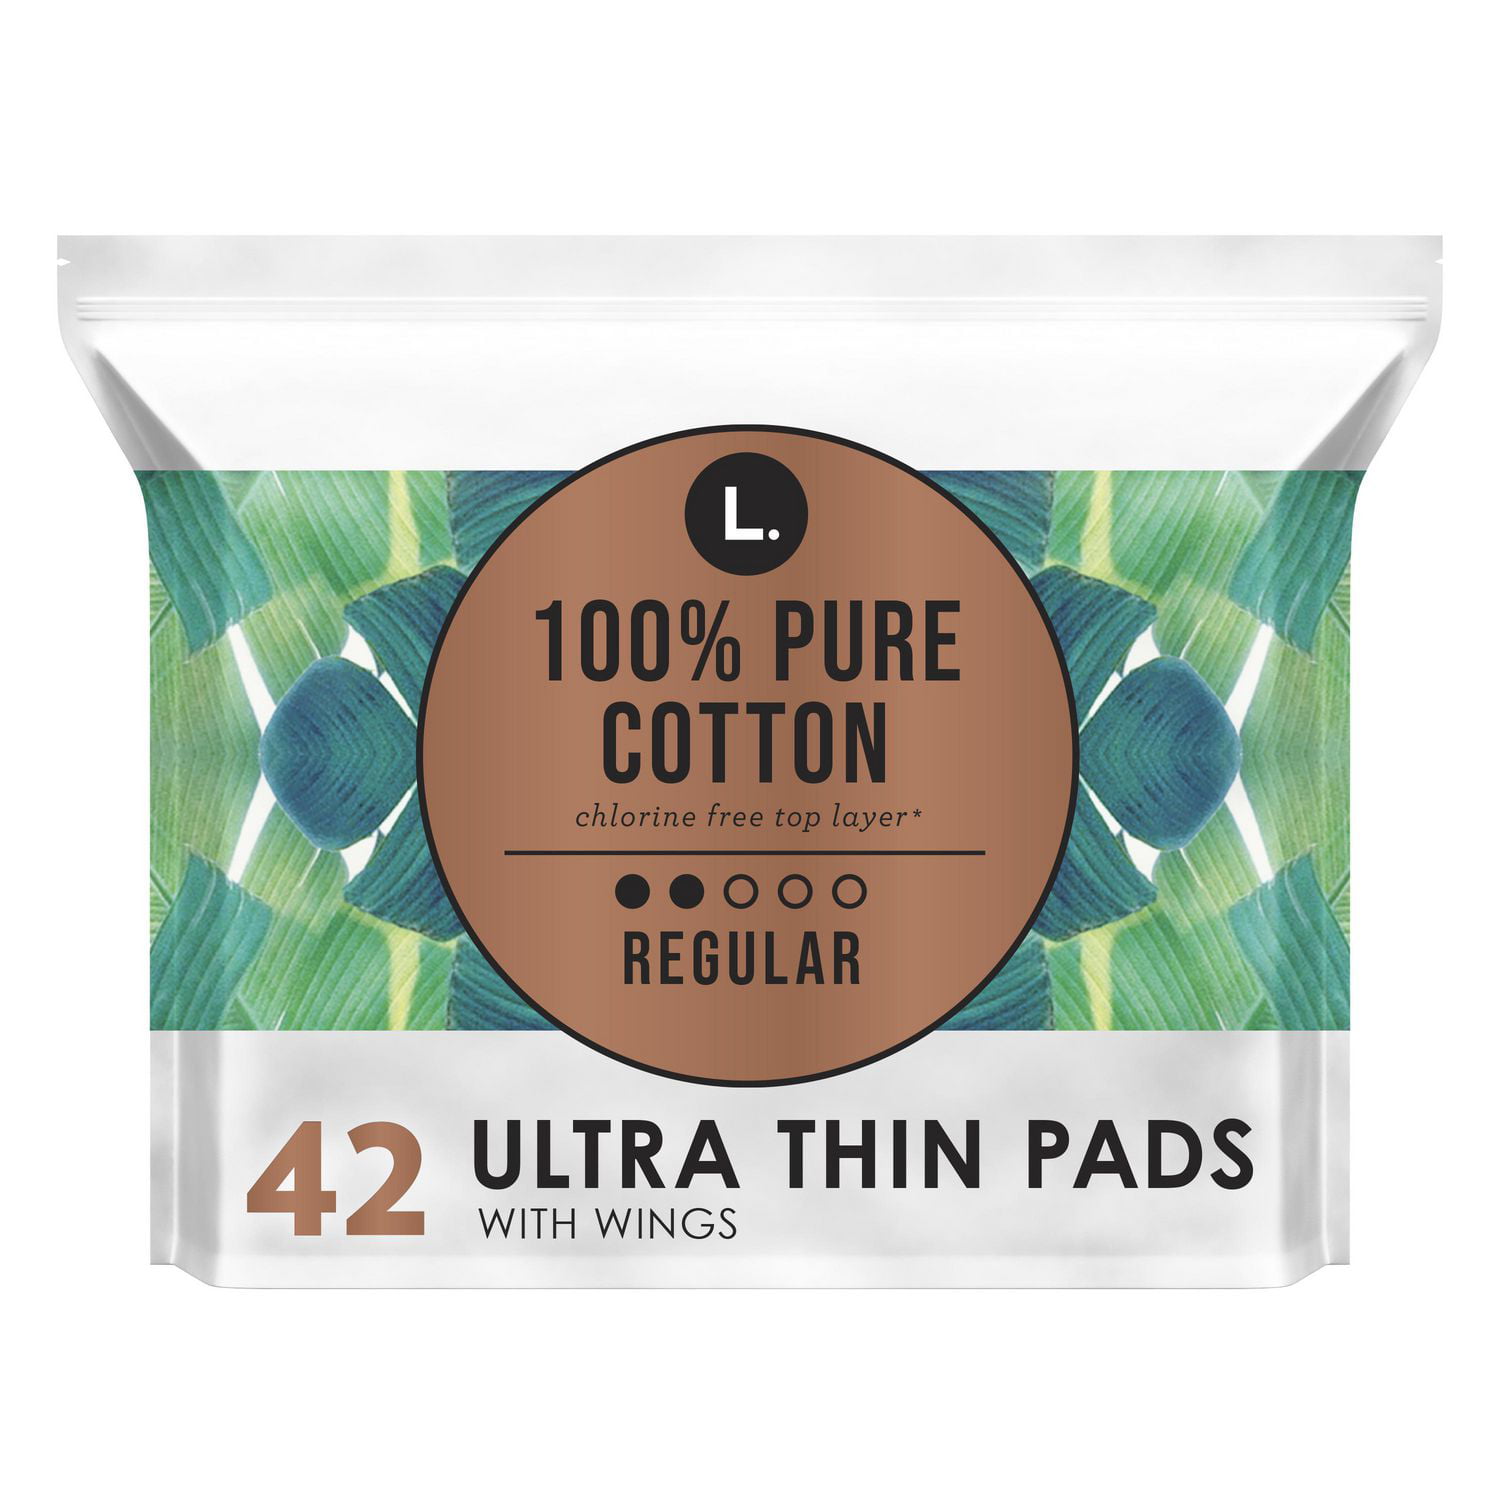 L. Ultra Thin Unscented Pads With Wings, Regular Absorbency, 100% Pure  Cotton Chlorine Free Top Layer, 42 Count